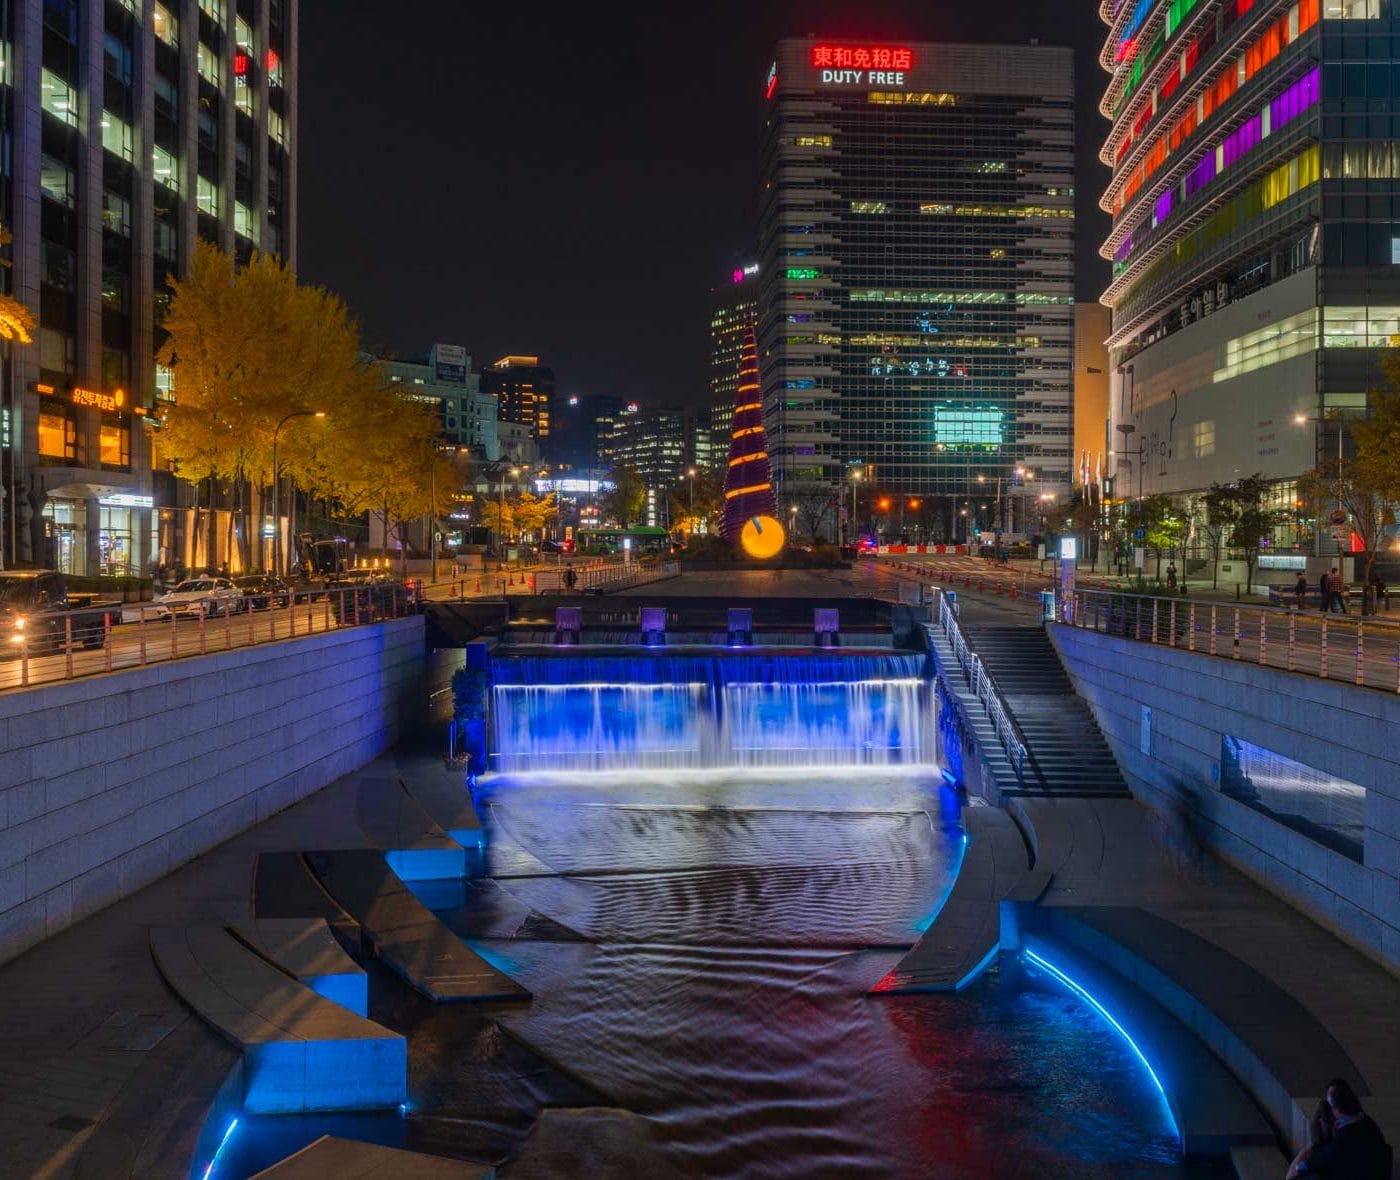 Seoul at Night - Best Views, Activities, Areas and More 1